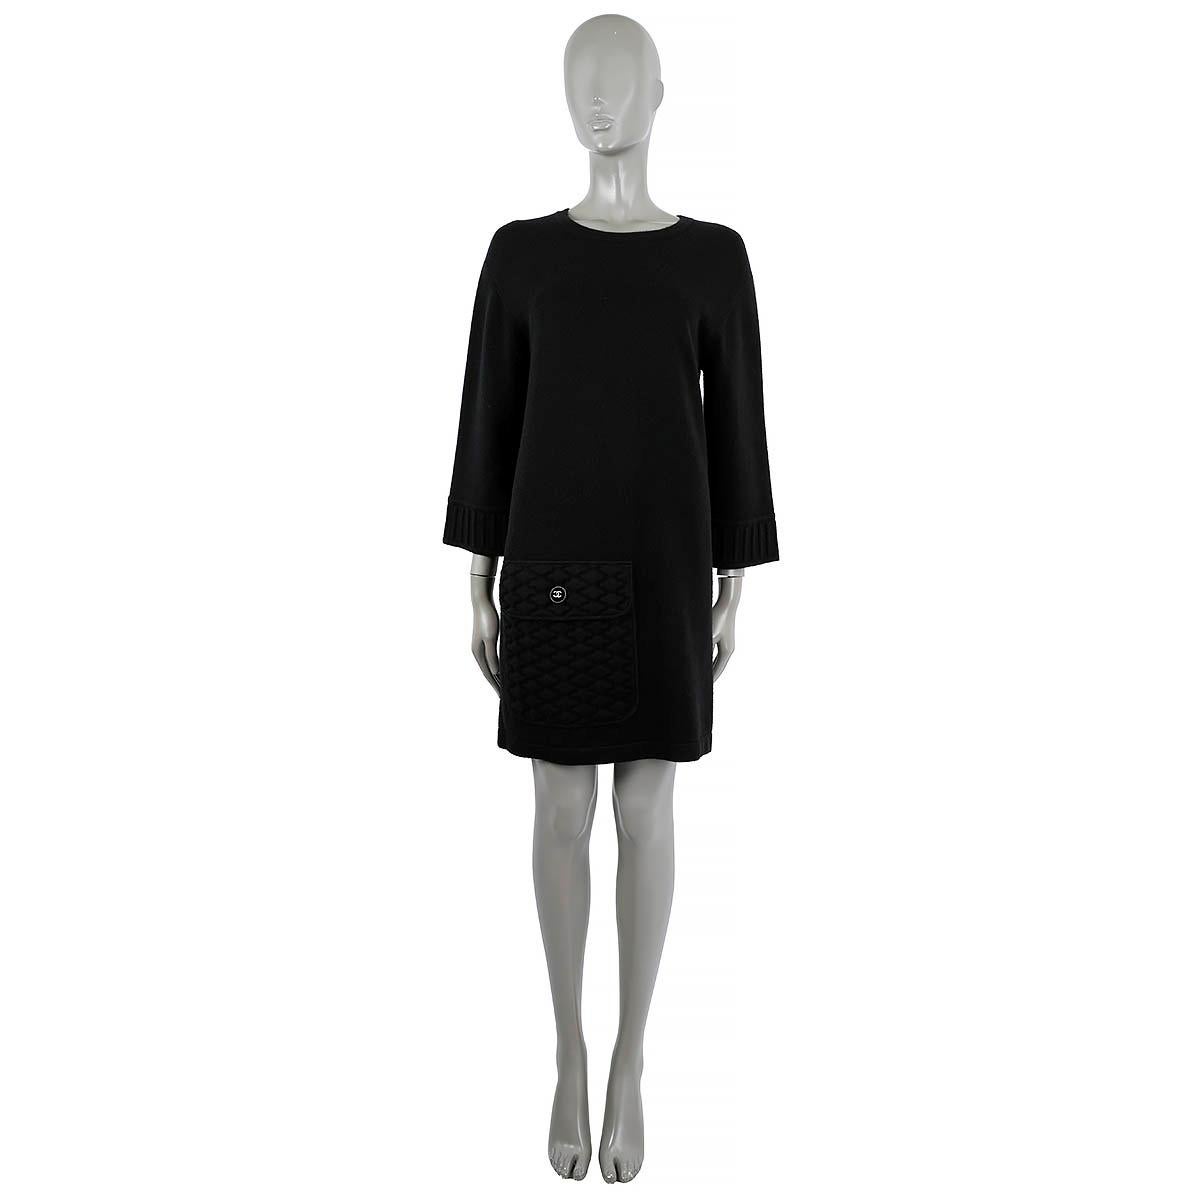 100% authentic Chanel knit dress in black cashmere (90%), nylon (9%) and spandex (1%). Features a large quilted flap pocket on the front, round neck and 3/4 sleeves. Lined in nylon (58%) and spandex (42%). Has been worn and is in excellent